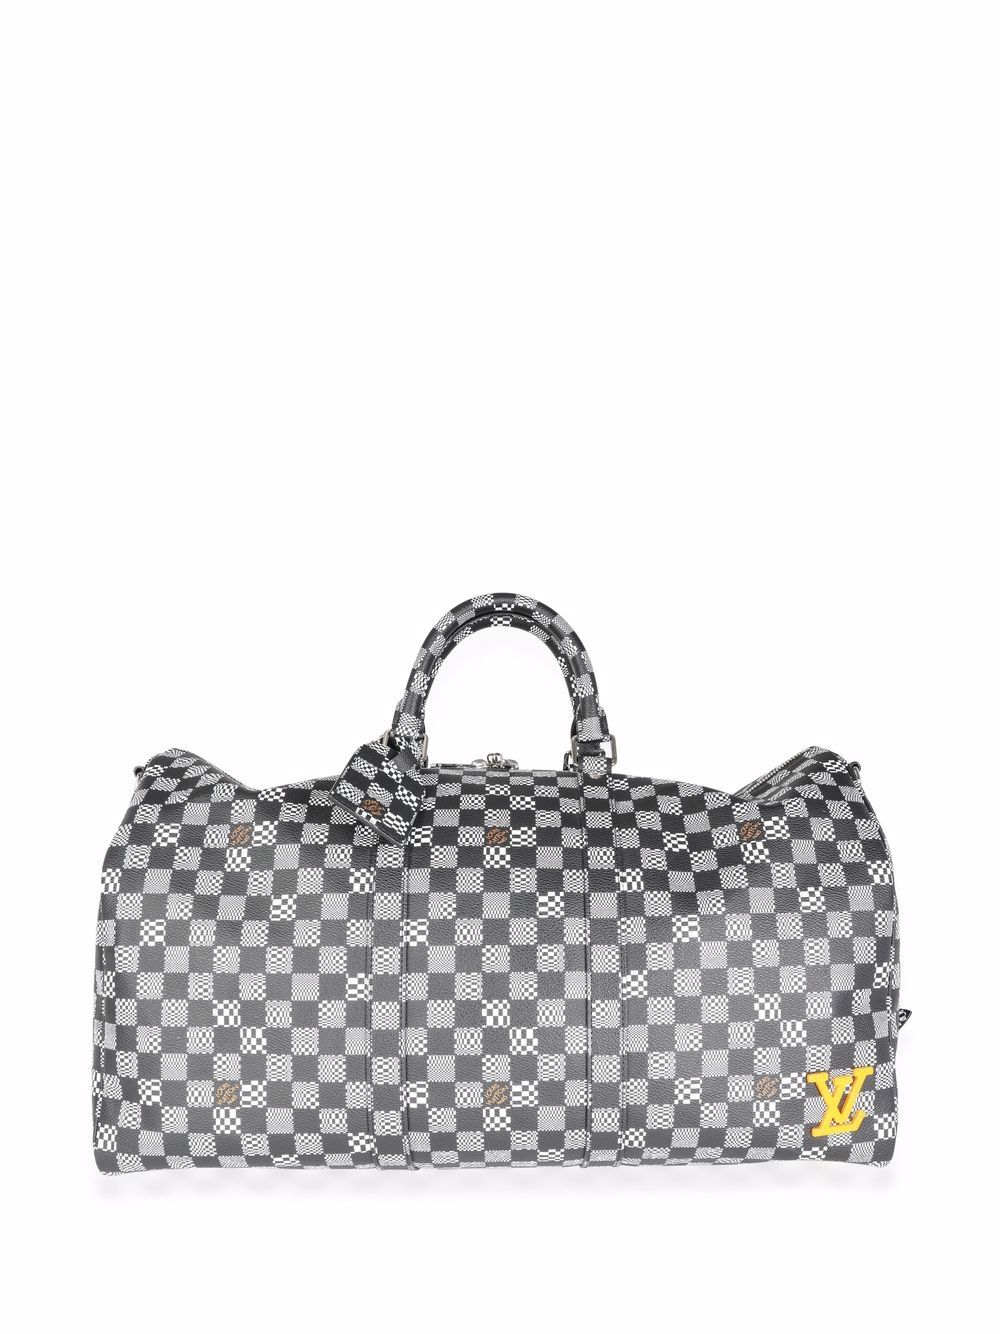 Louis Vuitton 2018 pre-owned Iridescent Keepall Bandouliere 50 Travel Bag -  Farfetch